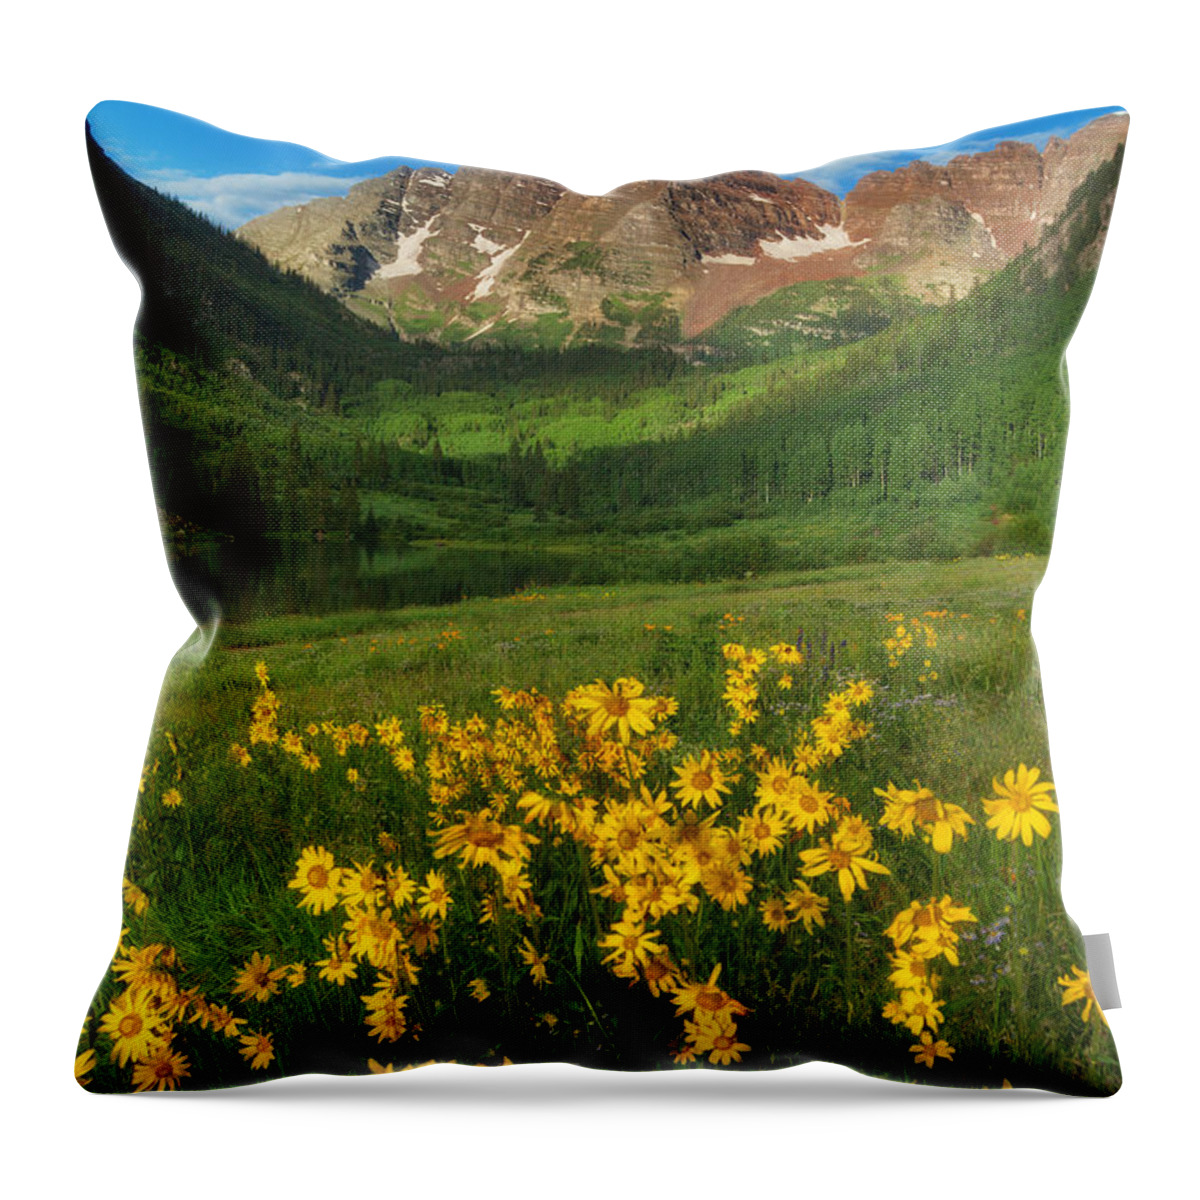 Colorado Landscapes Throw Pillow featuring the photograph Maroon Summer by Darren White